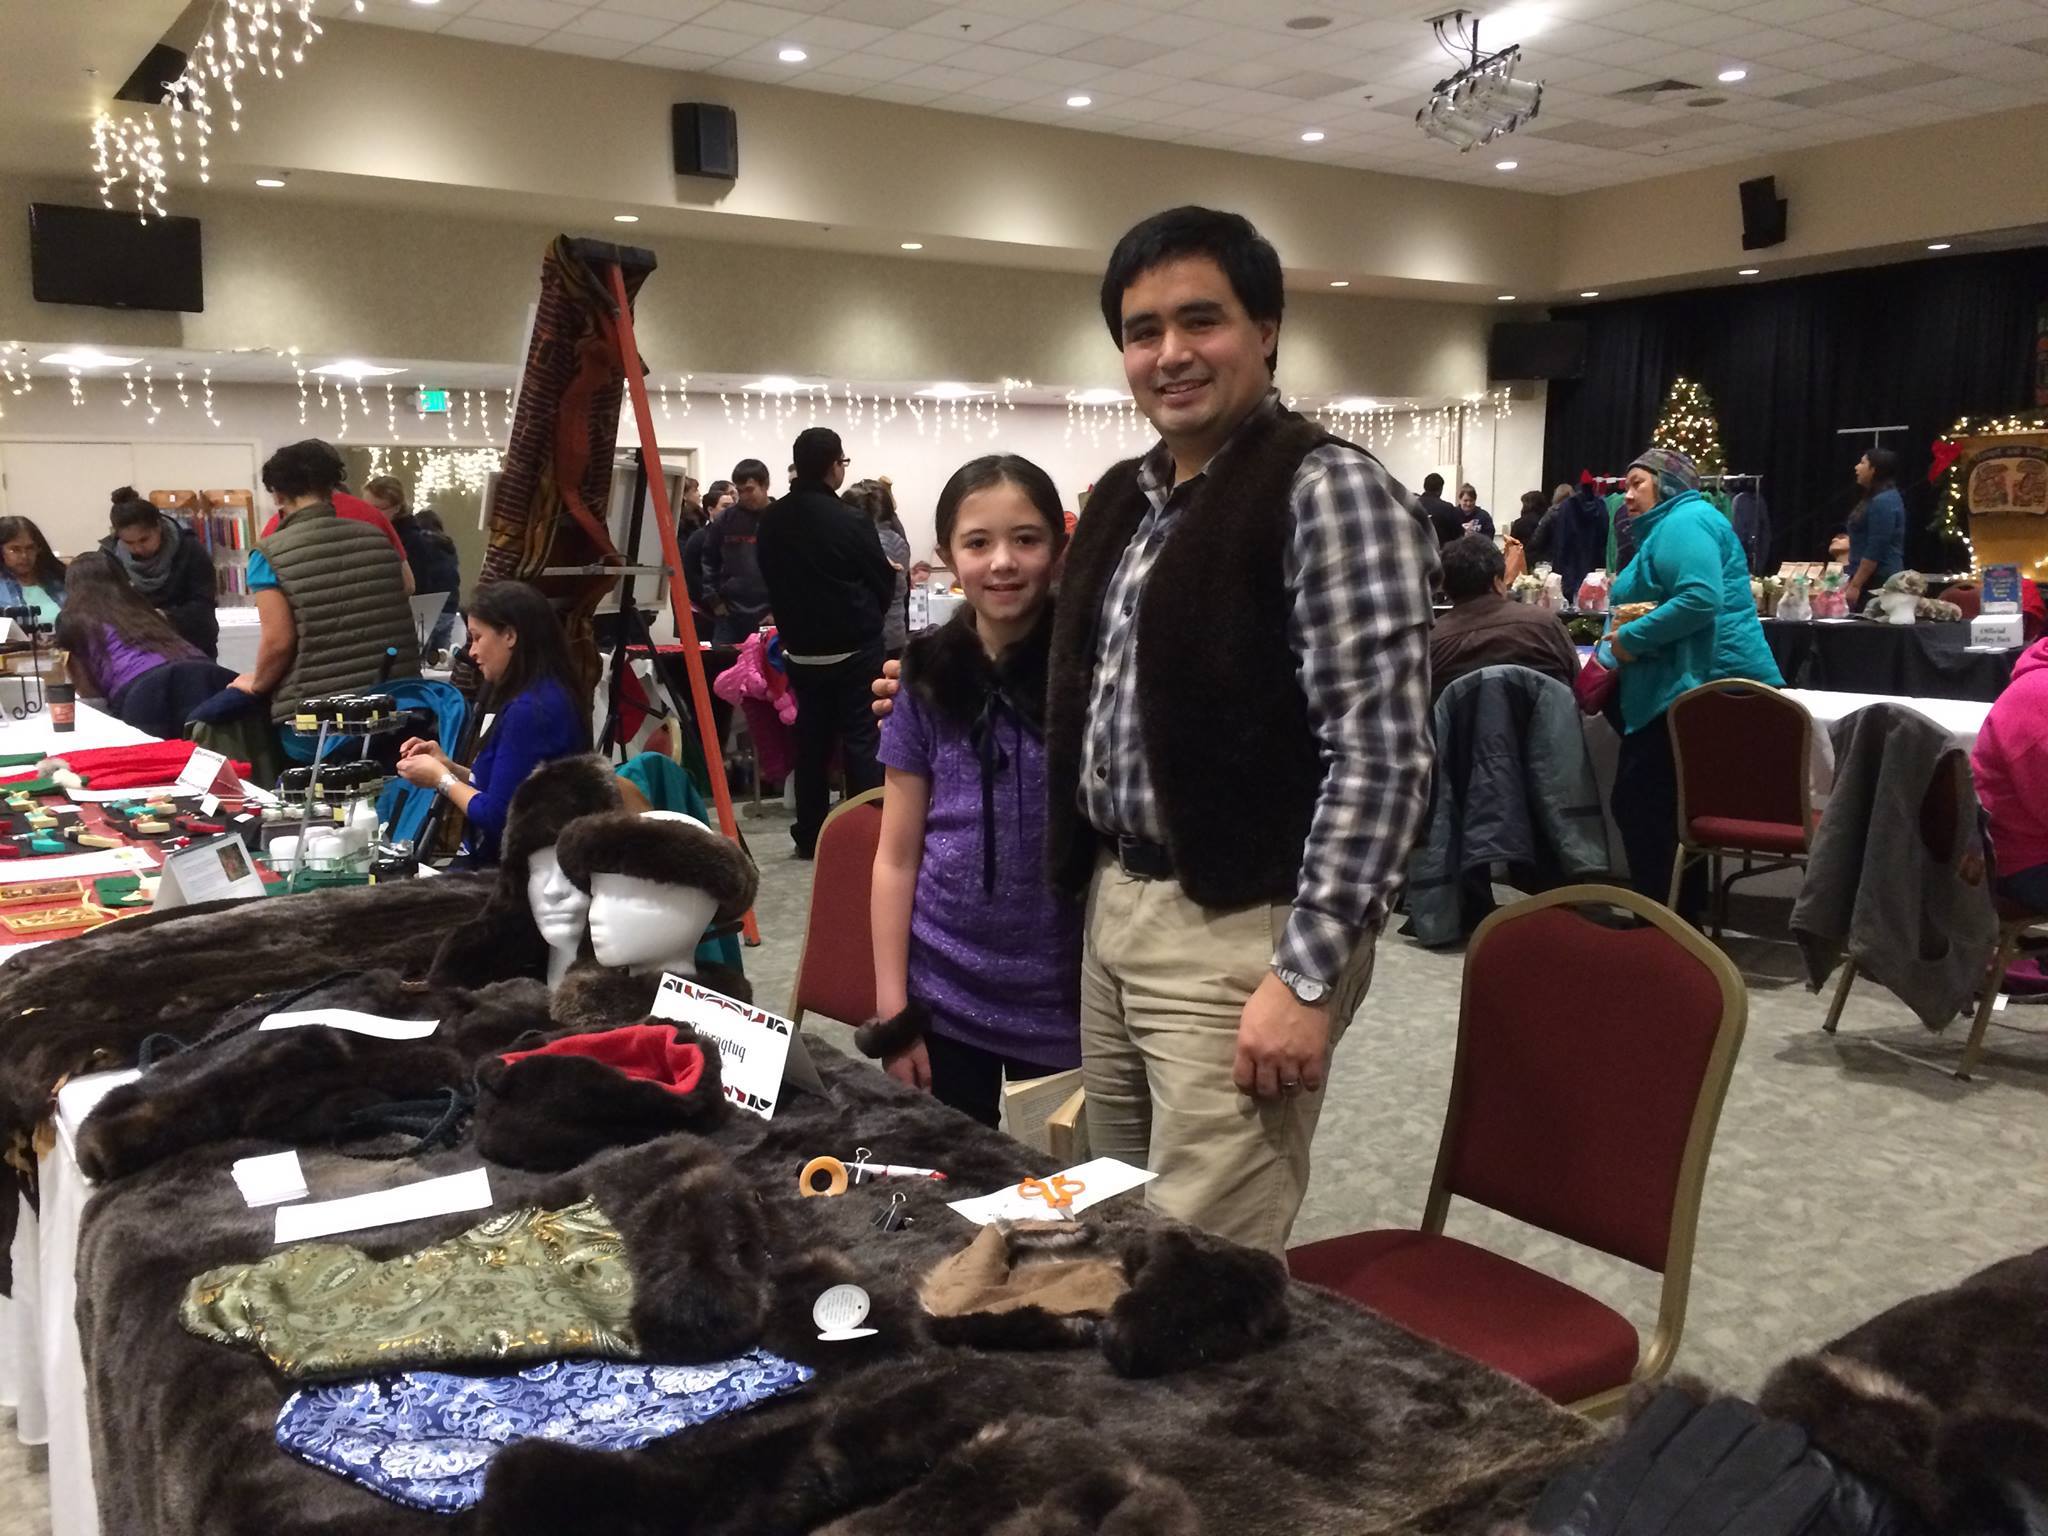 Marcus Gho poses with his daughter at his craft table at the Native Artists Market in November 2016. (Photo courtesy Marcus Gho)